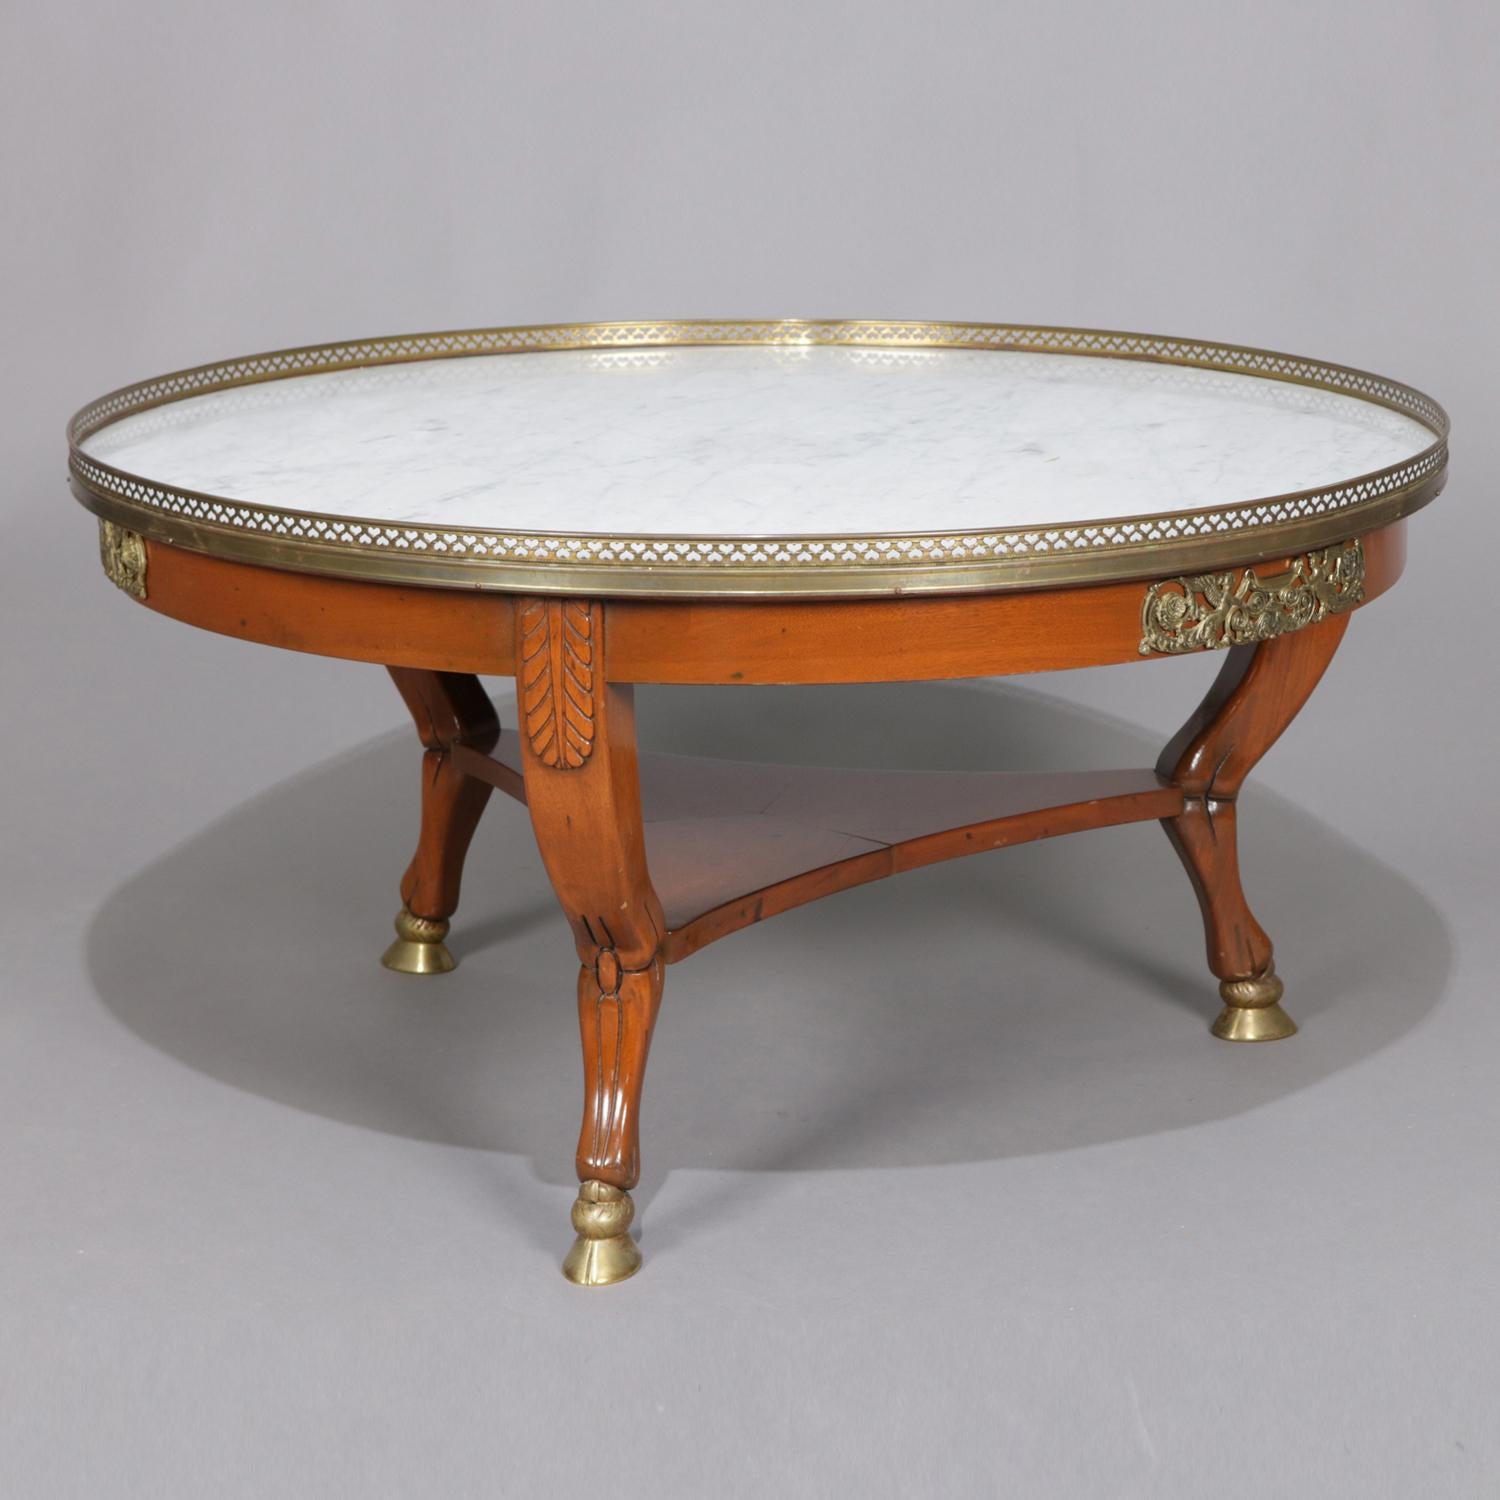 Cast French Neoclassical Carved Mahogany, Ormolu and Marble Coffee Table, circa 1930